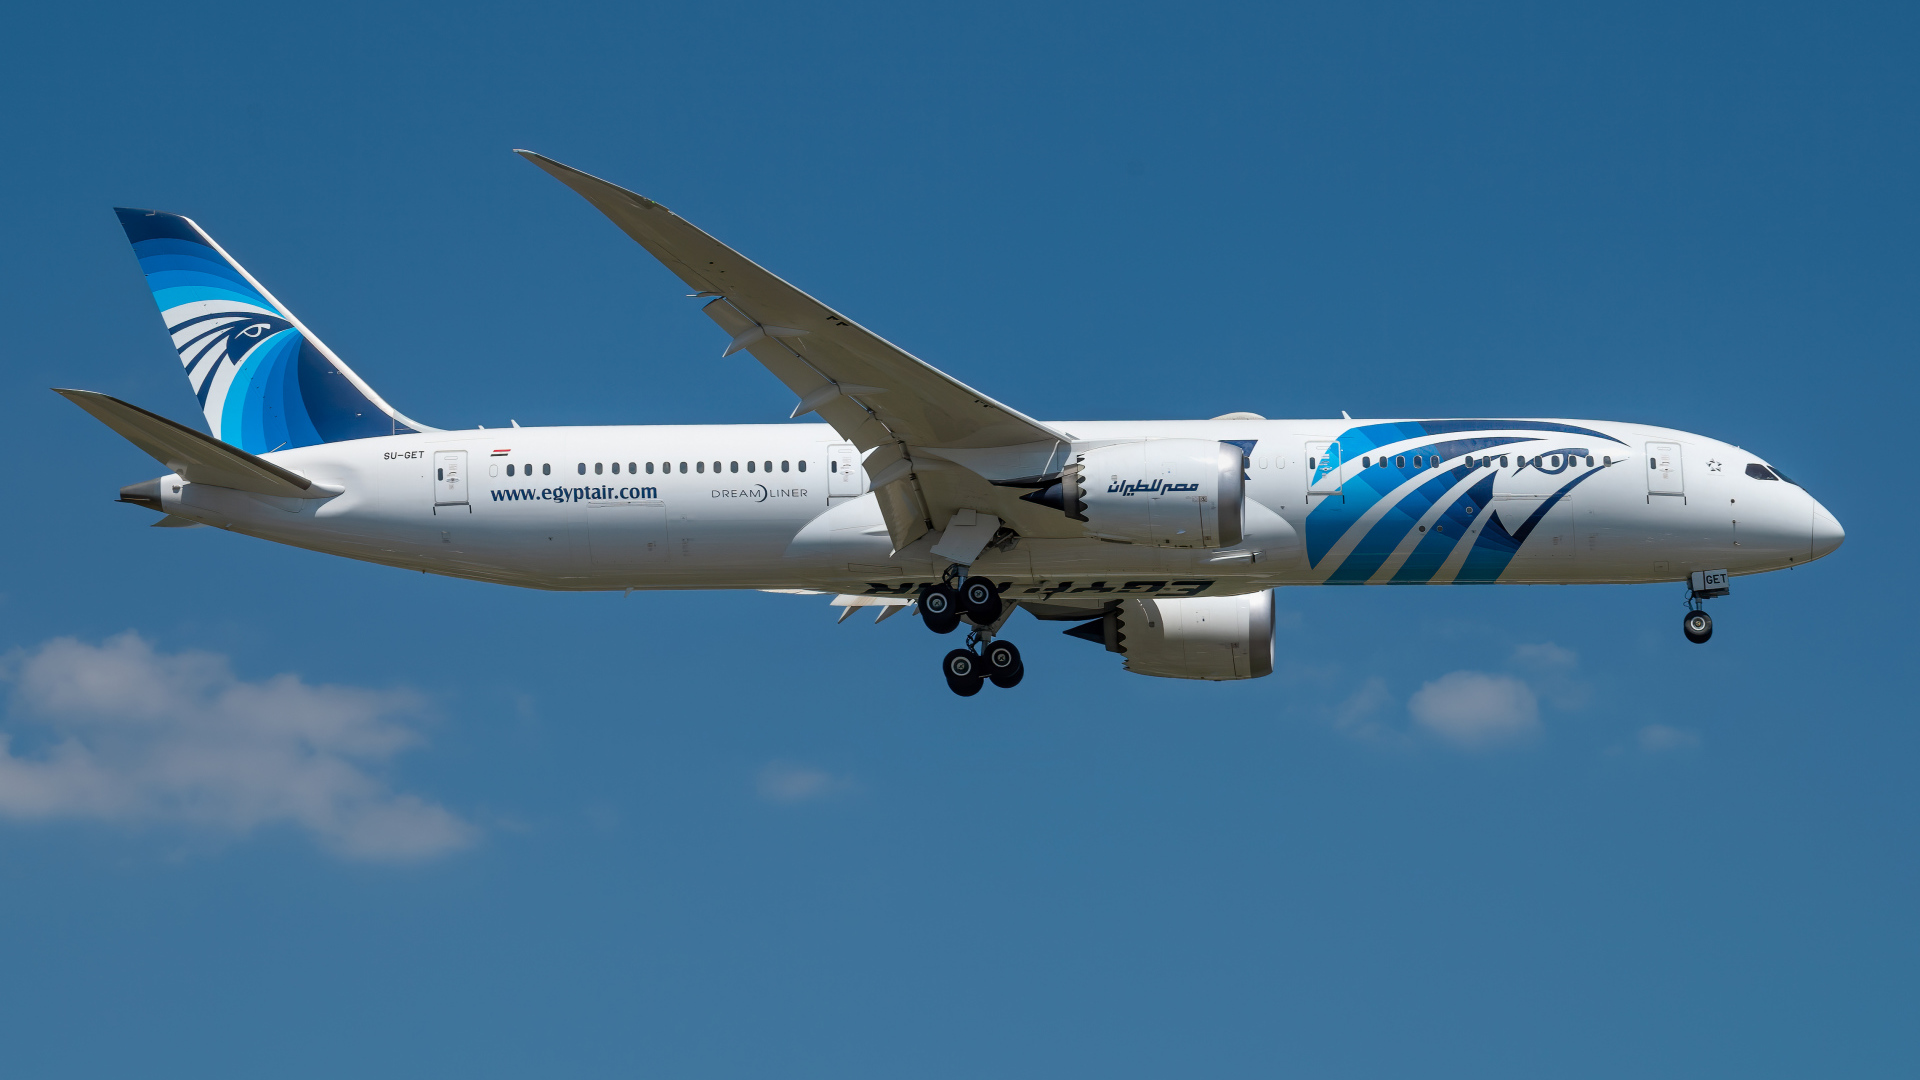 Large passenger plane takes off in the blue sky